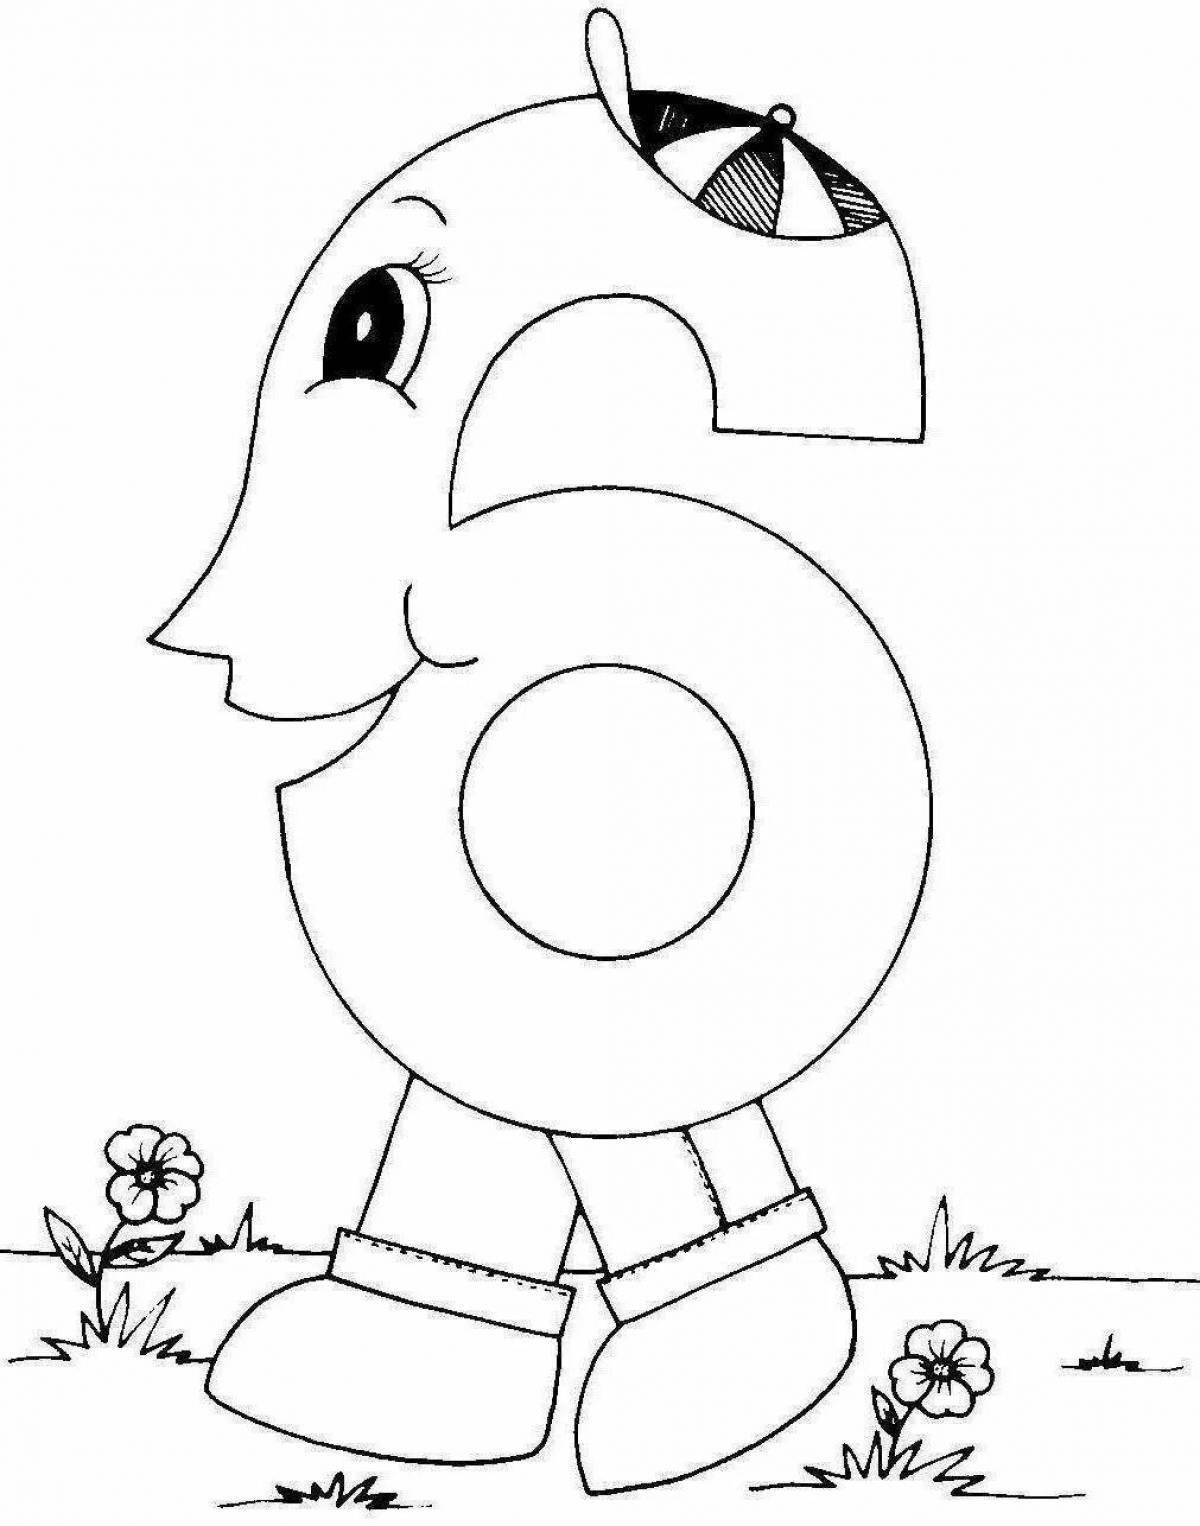 Fun coloring pages of animated figures